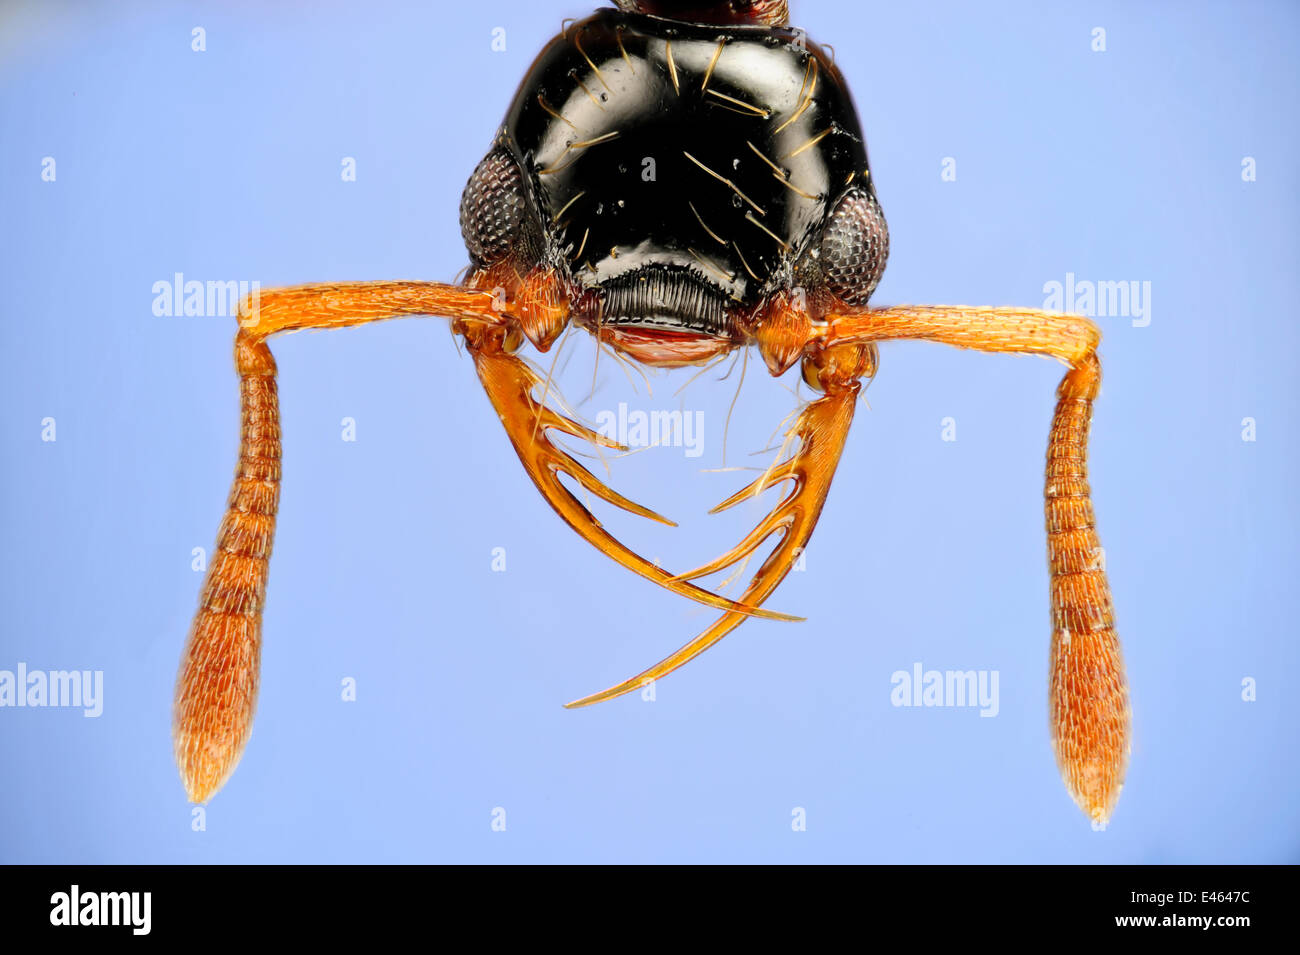 Close-up of ant (Thaumatomyrmex atrox) from the neotropics,  specialists predators on millipedes Specimen photographed using digital focus stacking Stock Photo